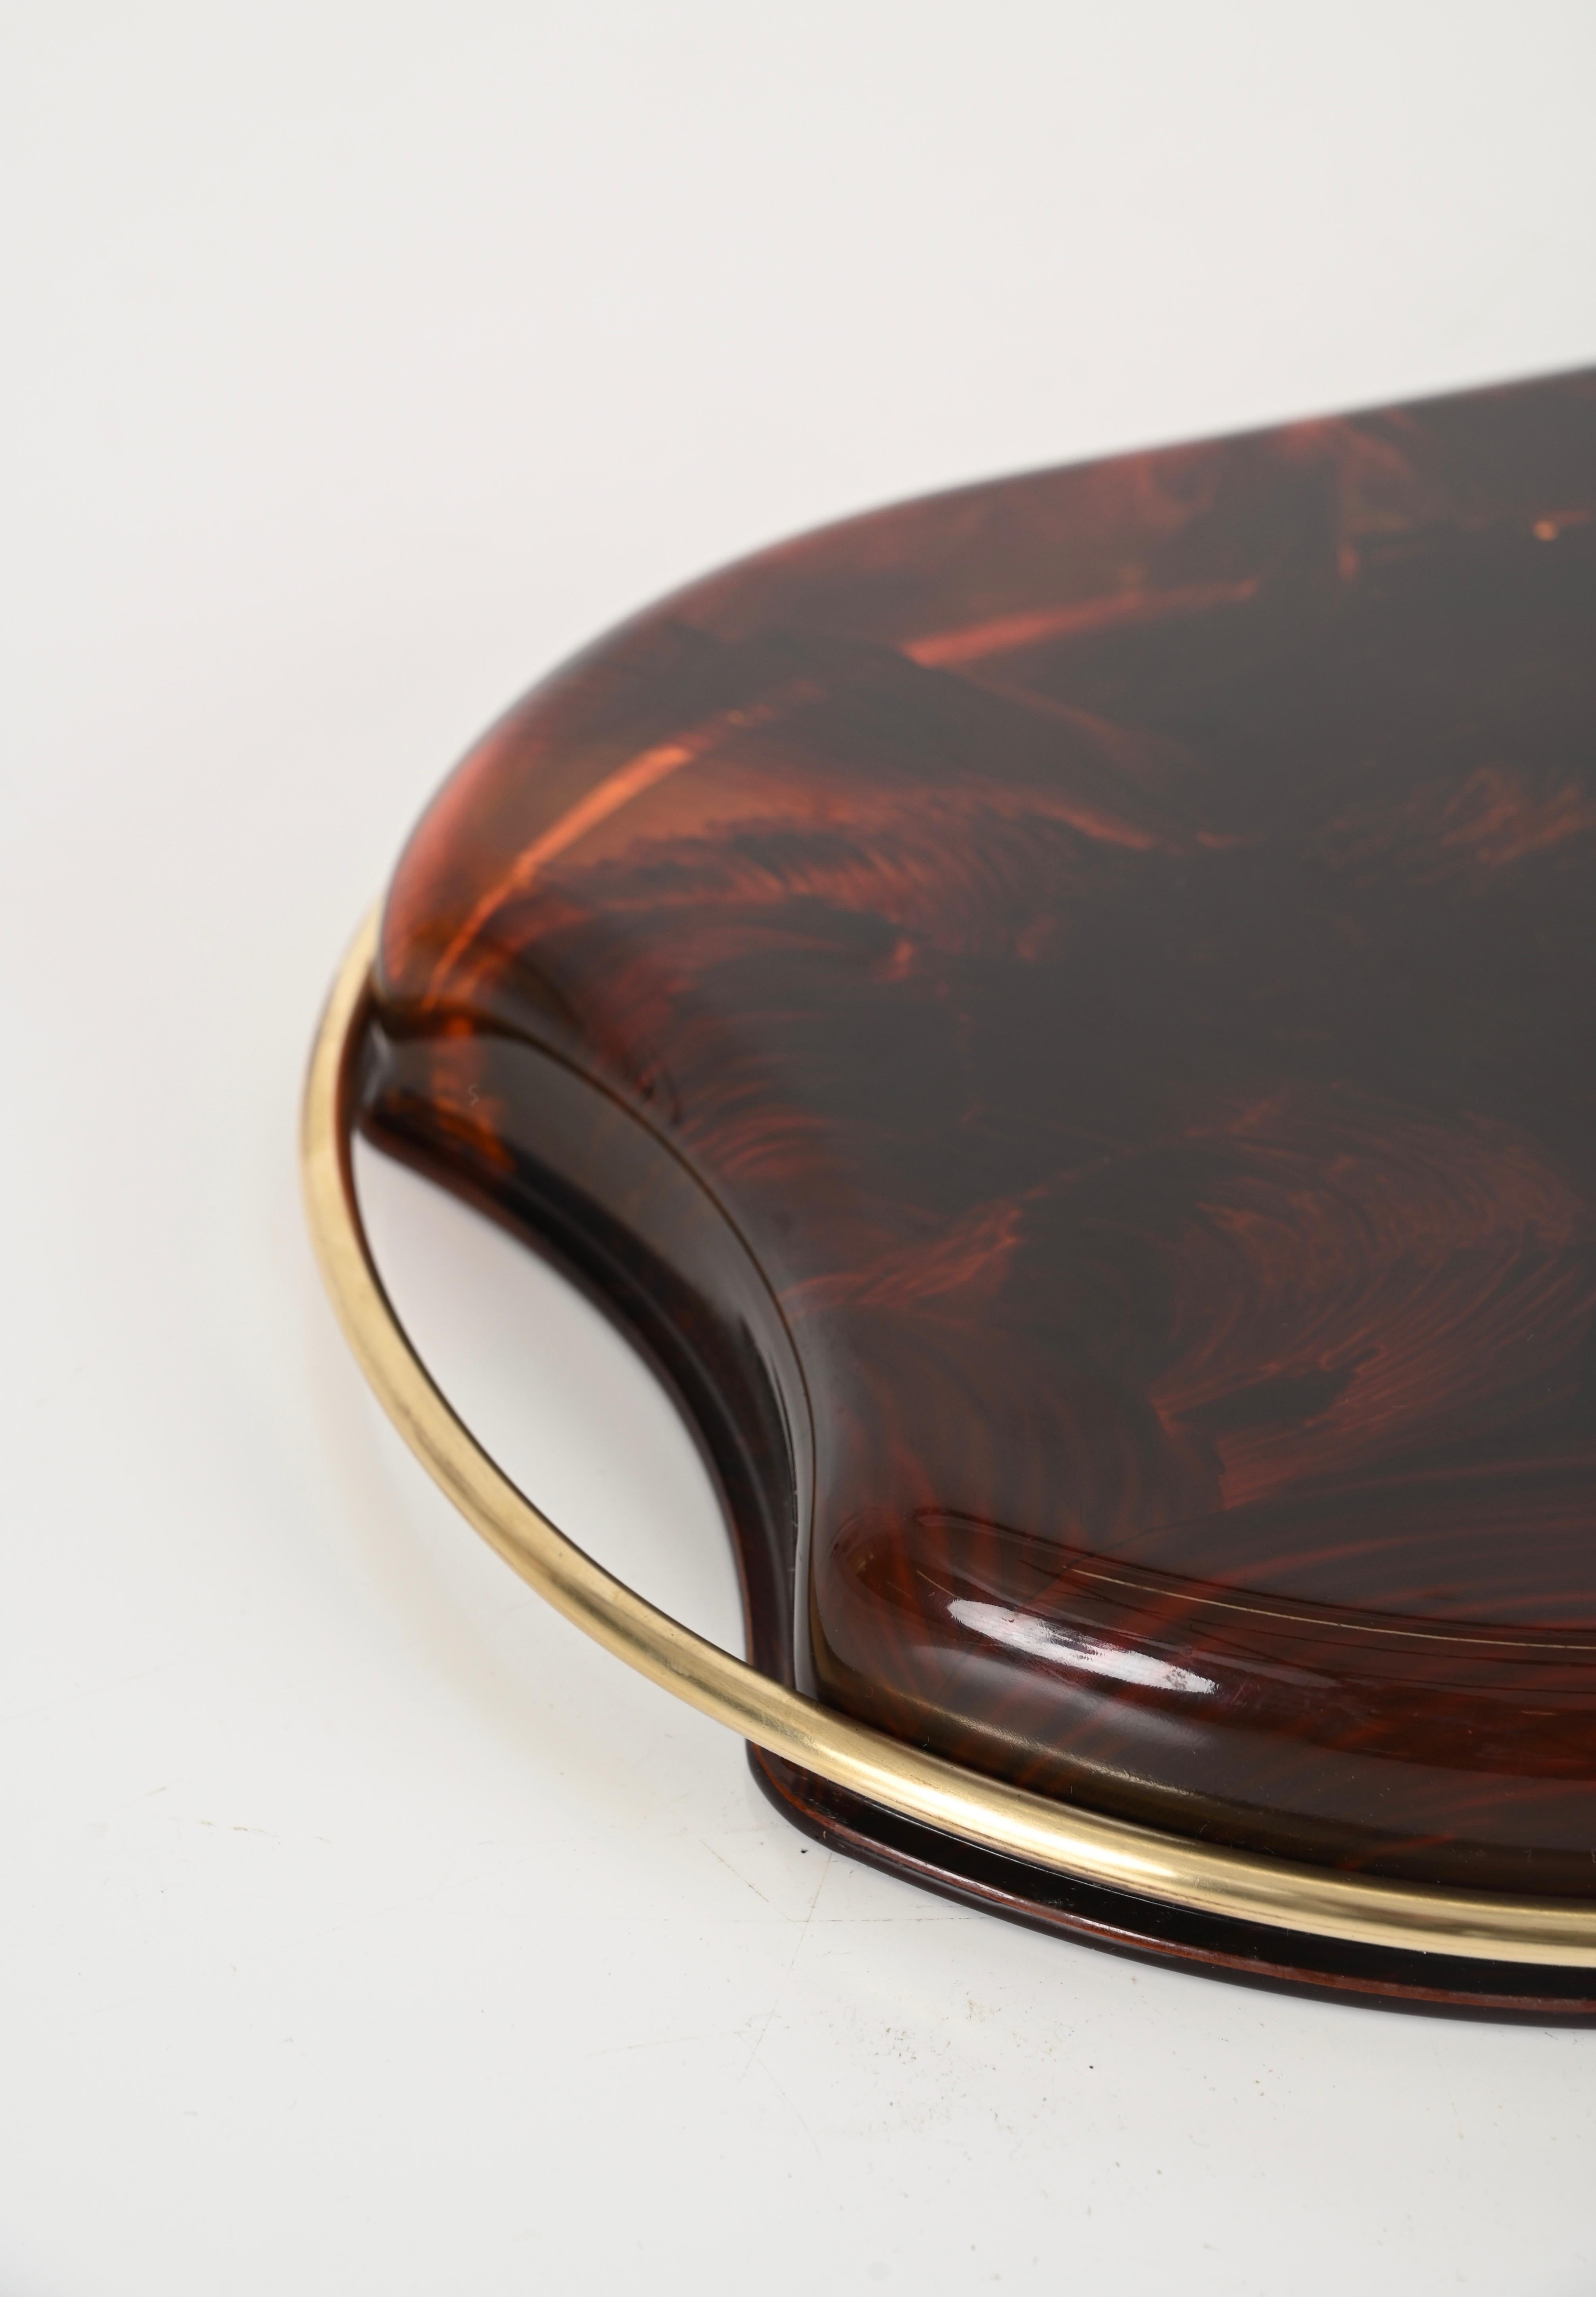 Midcentury Modern By Guzzini Italian Lucite and Brass Oval Serving Tray, 1970s For Sale 3